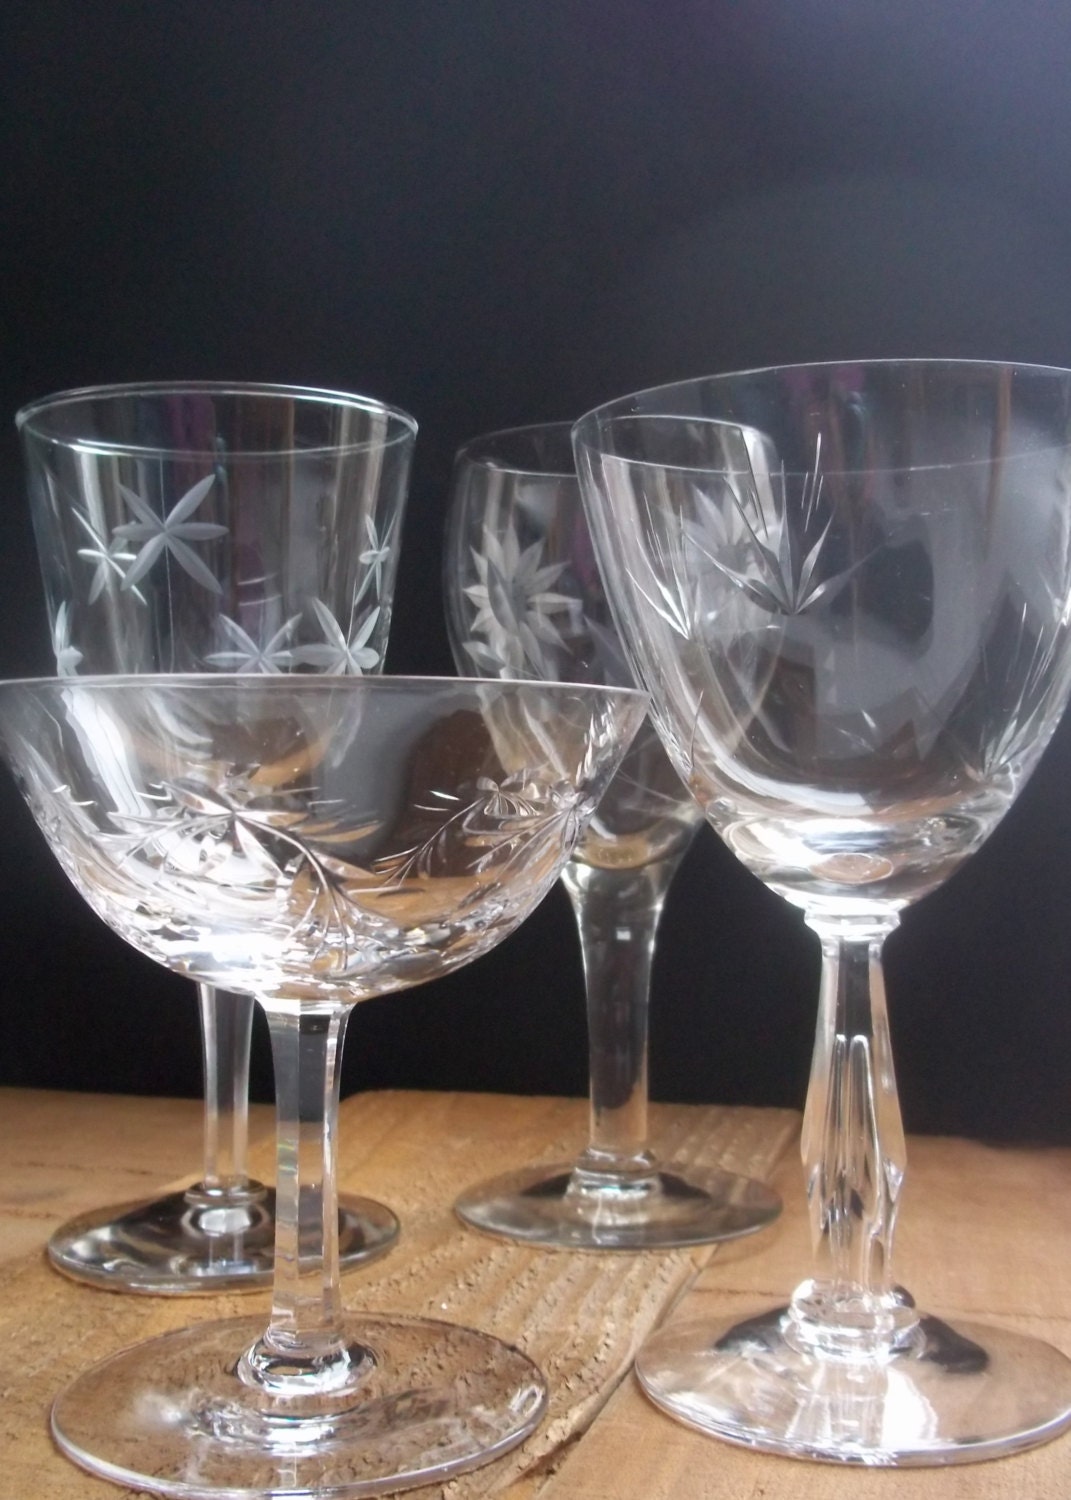 Eclectic Set of 4 Vintage Etched Cocktail/Wine Glasses Housewares Entertaining Holiday Table Wedding - SPARKLESandSASS